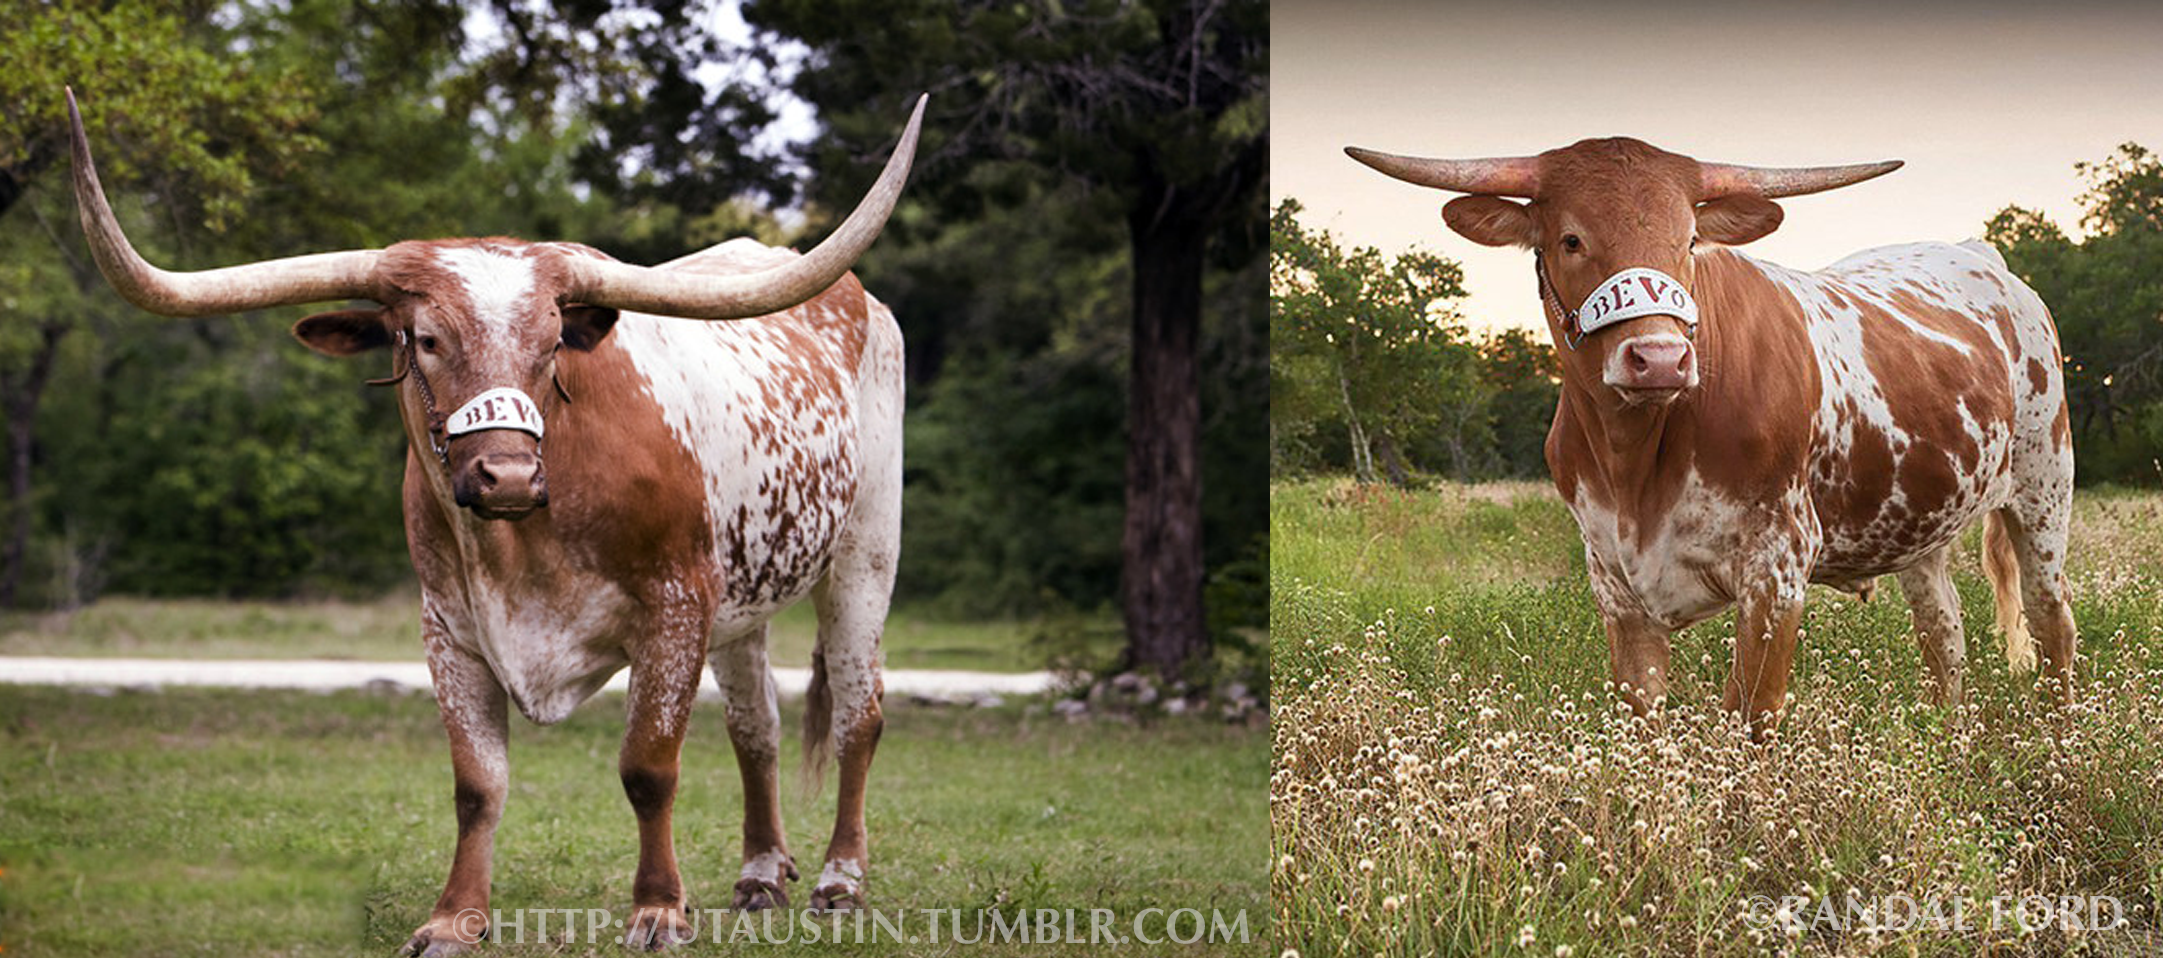 Bevo: The Most Famous Texas Longhorn Steer